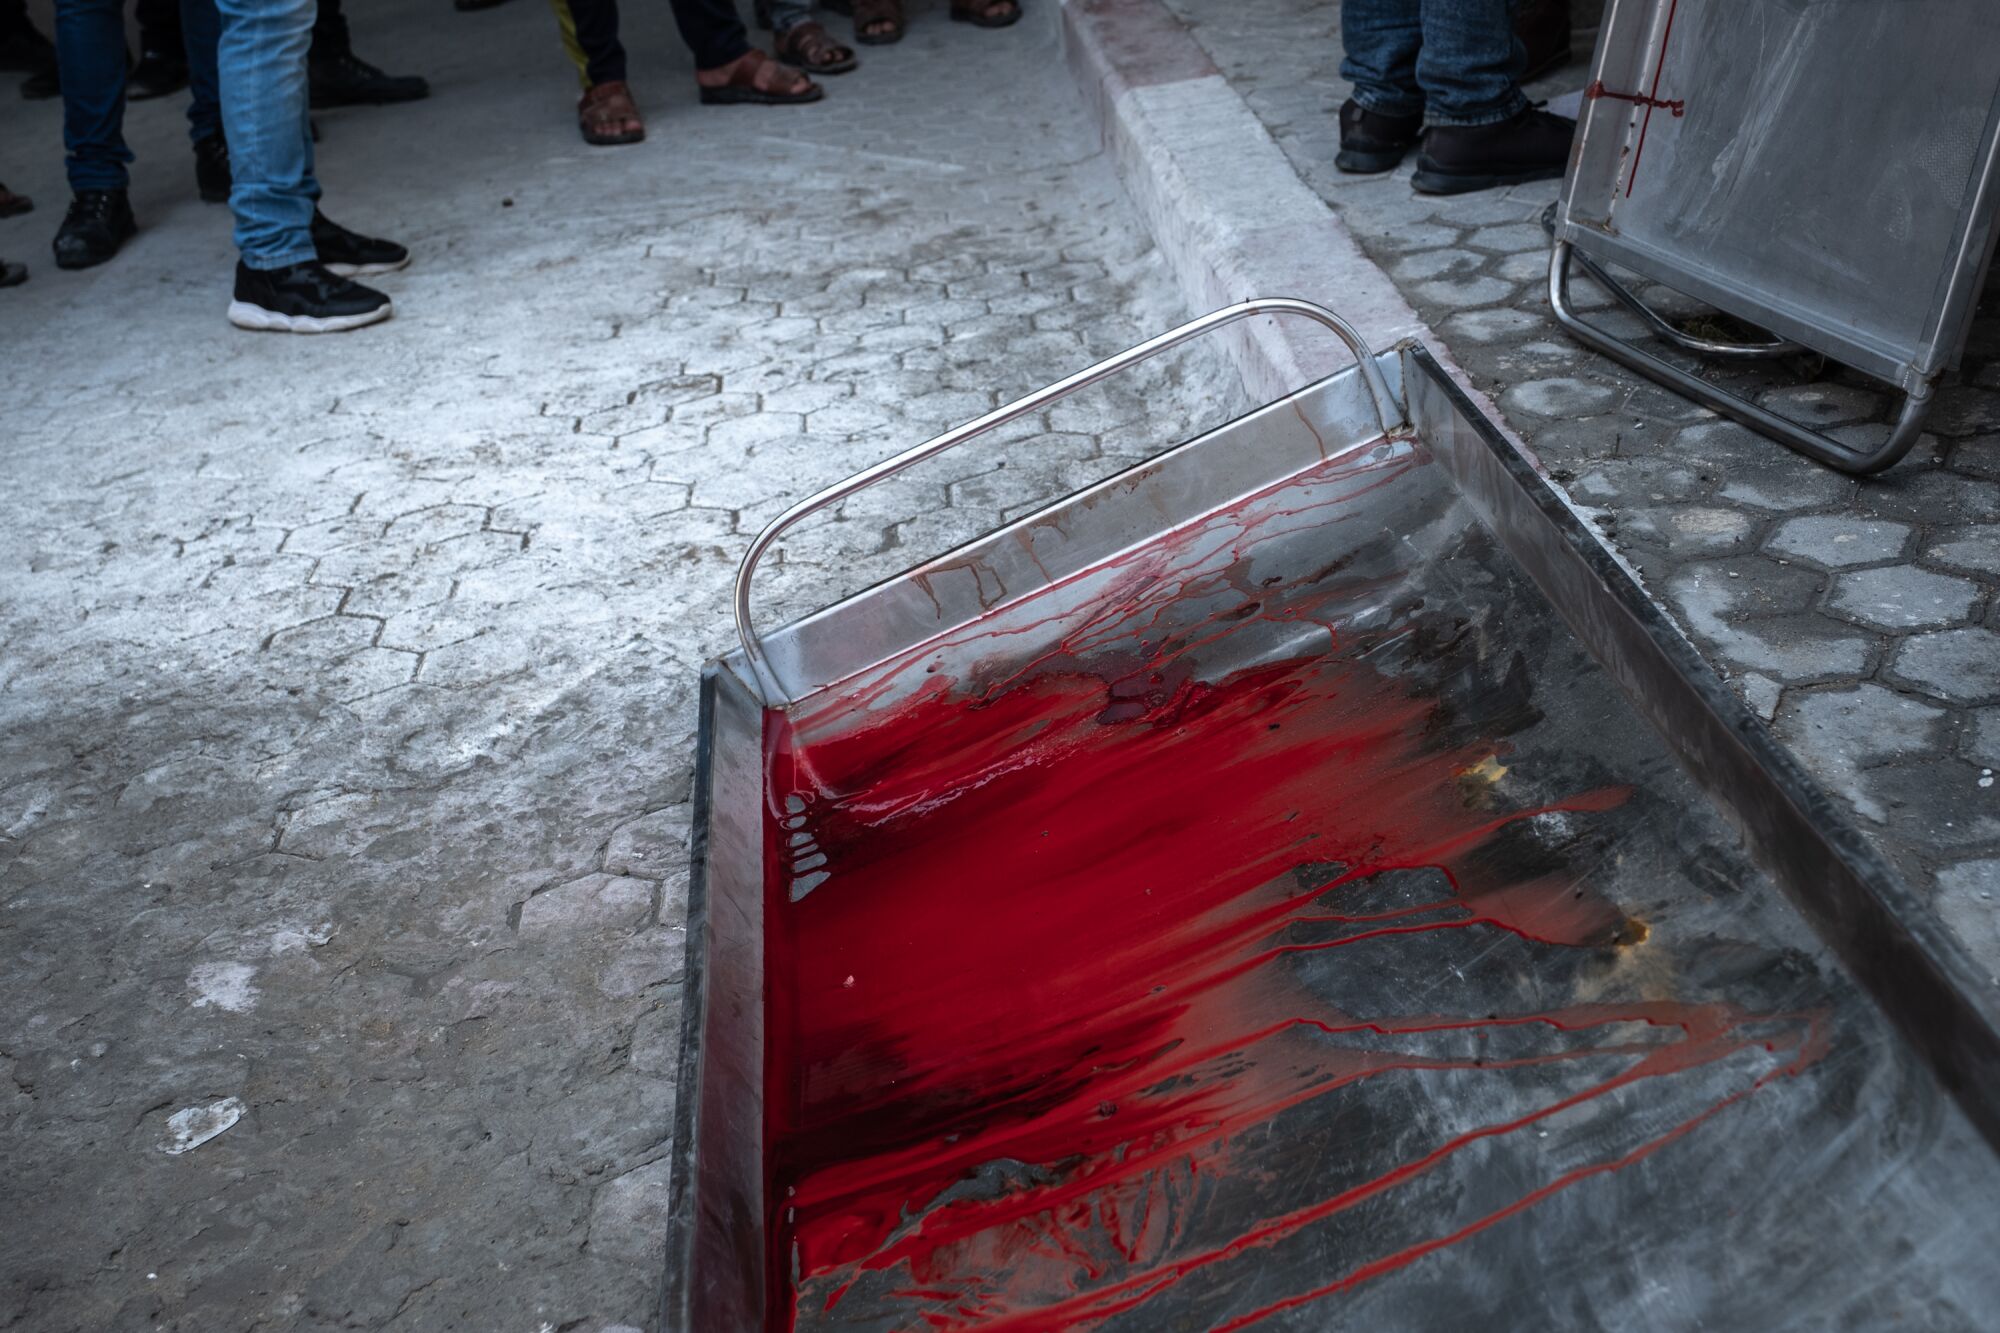 A metal pallet is covered with bright red blood